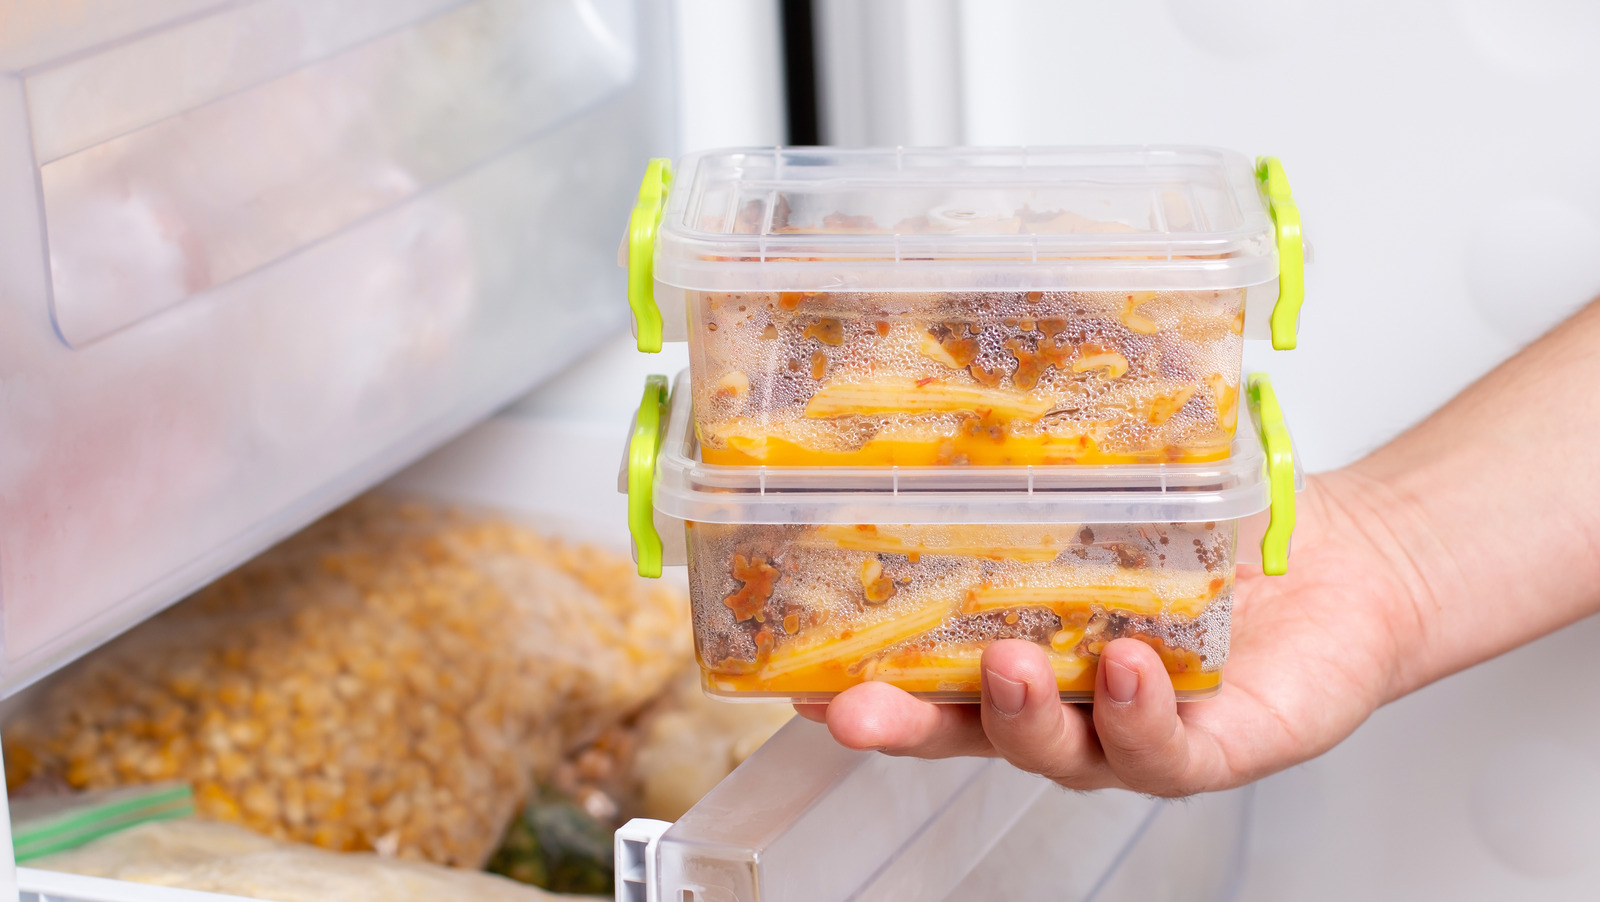 The Best Freezer Containers of 2023 - Picks from Bob Vila